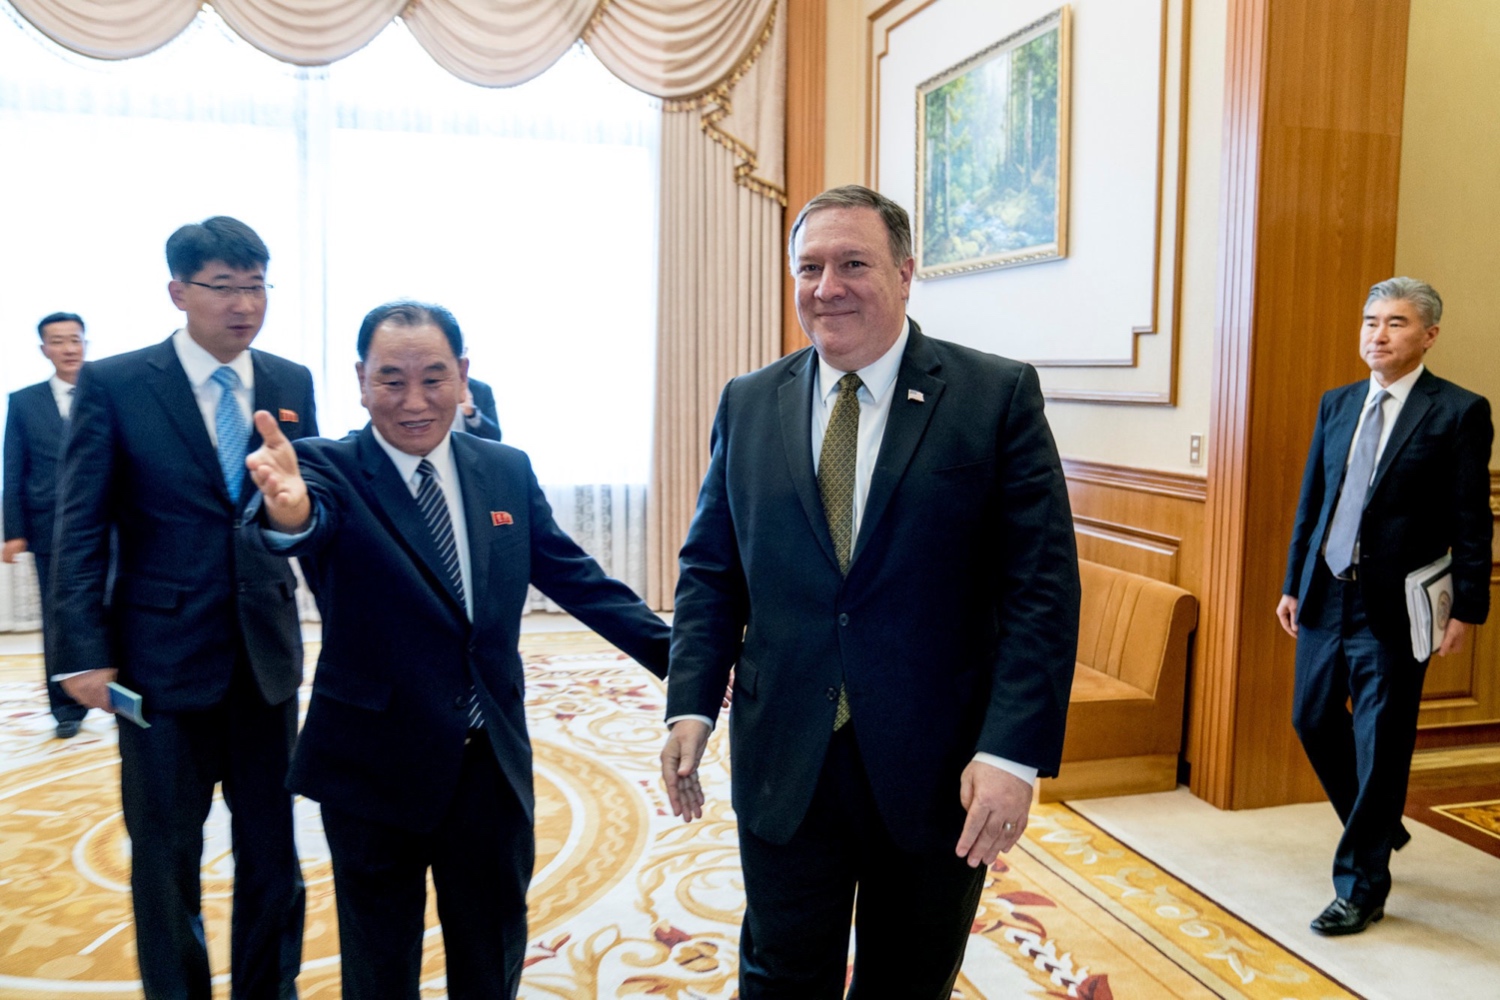 Secretary of State Mike Pompeo with the North Korean official Kim Yong-chol on Saturday in Pyongyang.CreditPool photo by Andrew Harnik